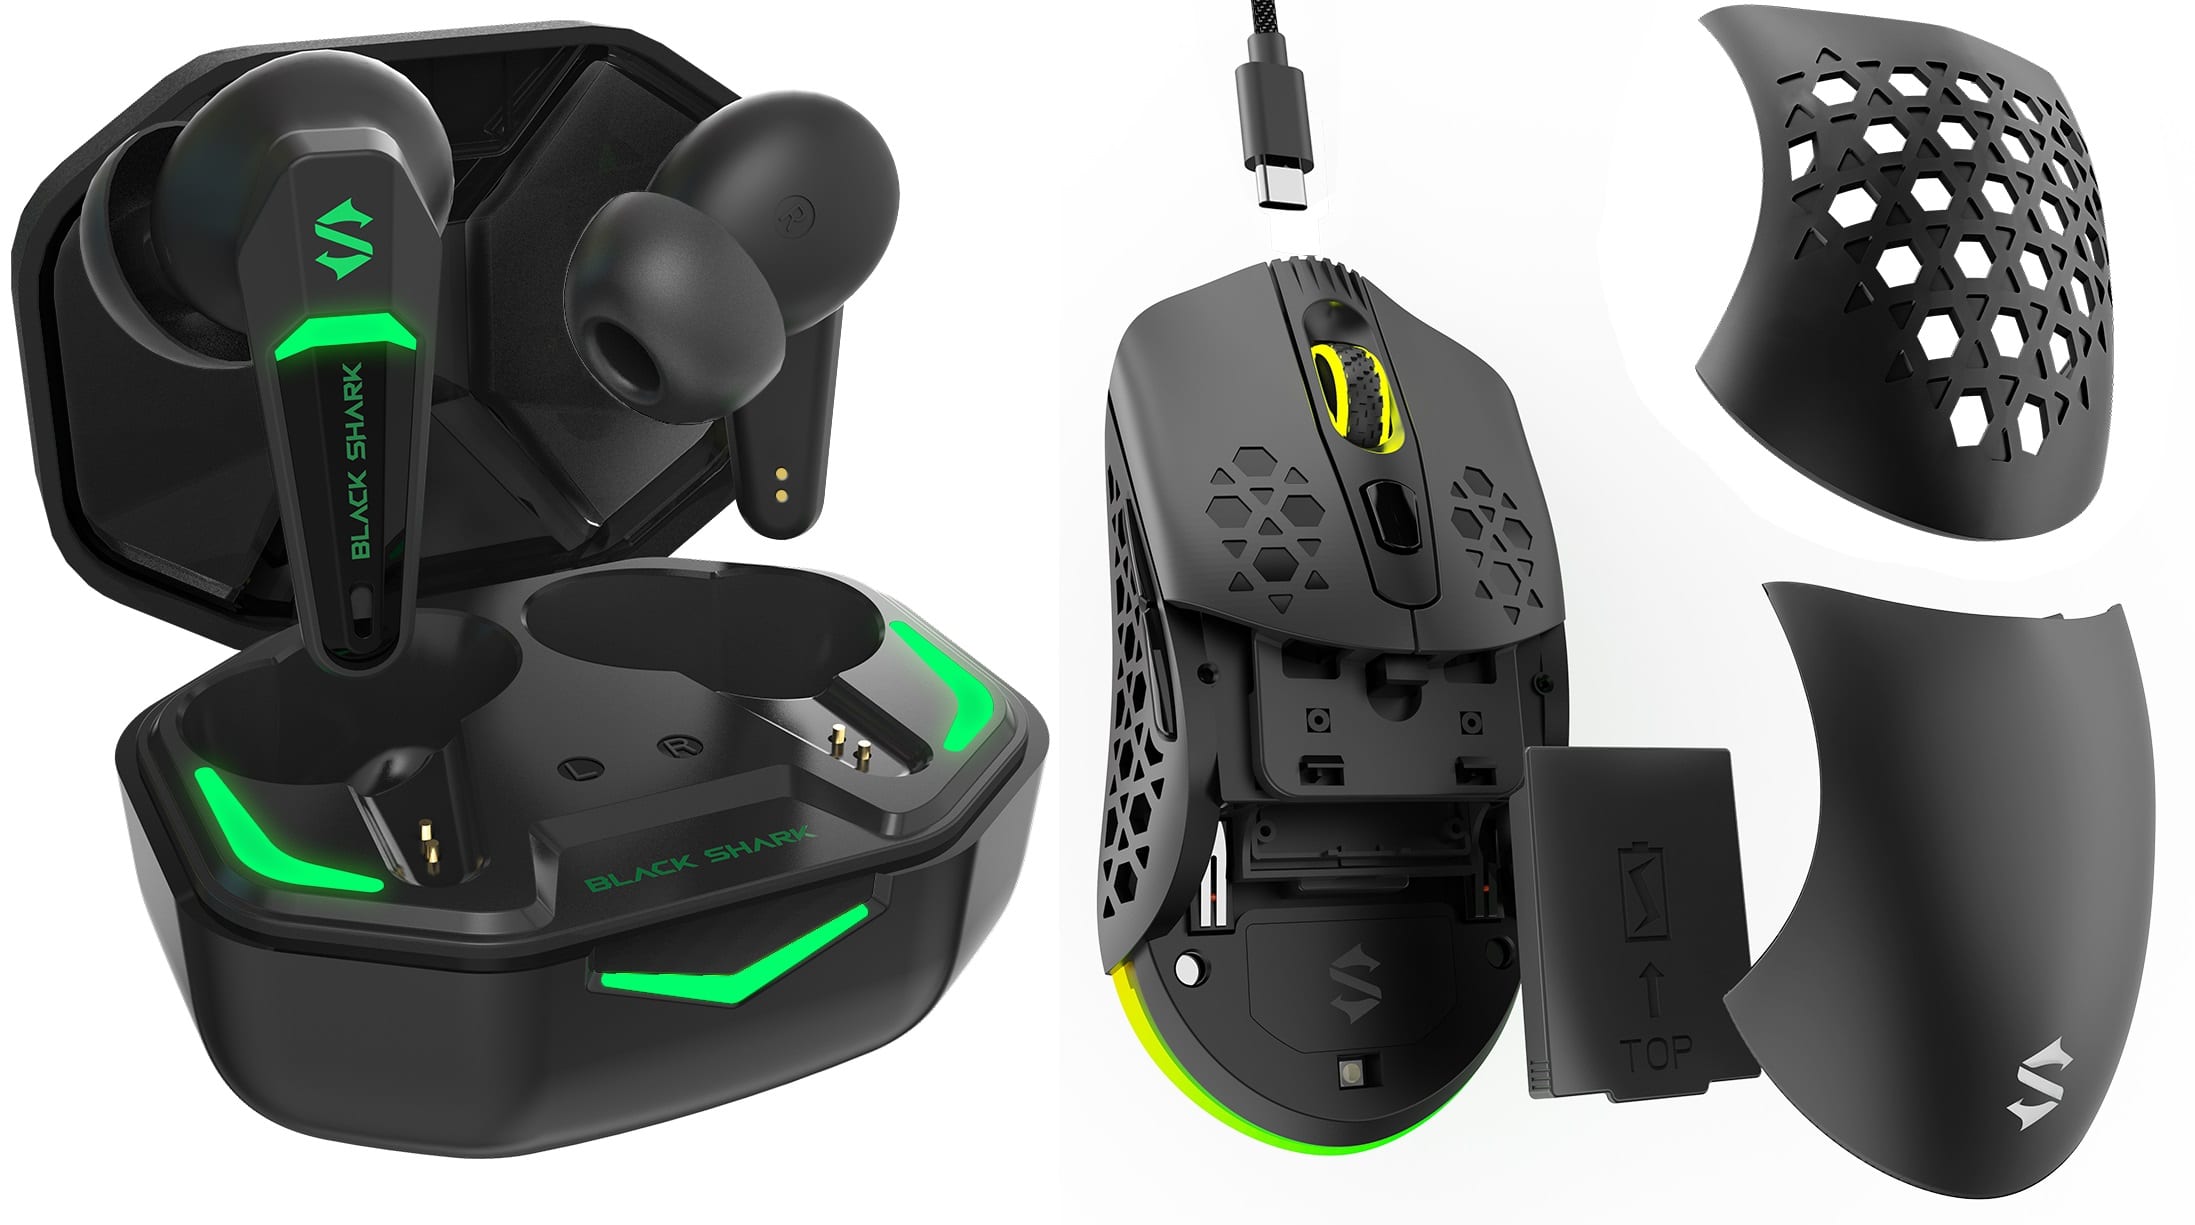 Your Mako M1 gaming mouse and Lucifer T1 headphones on sale